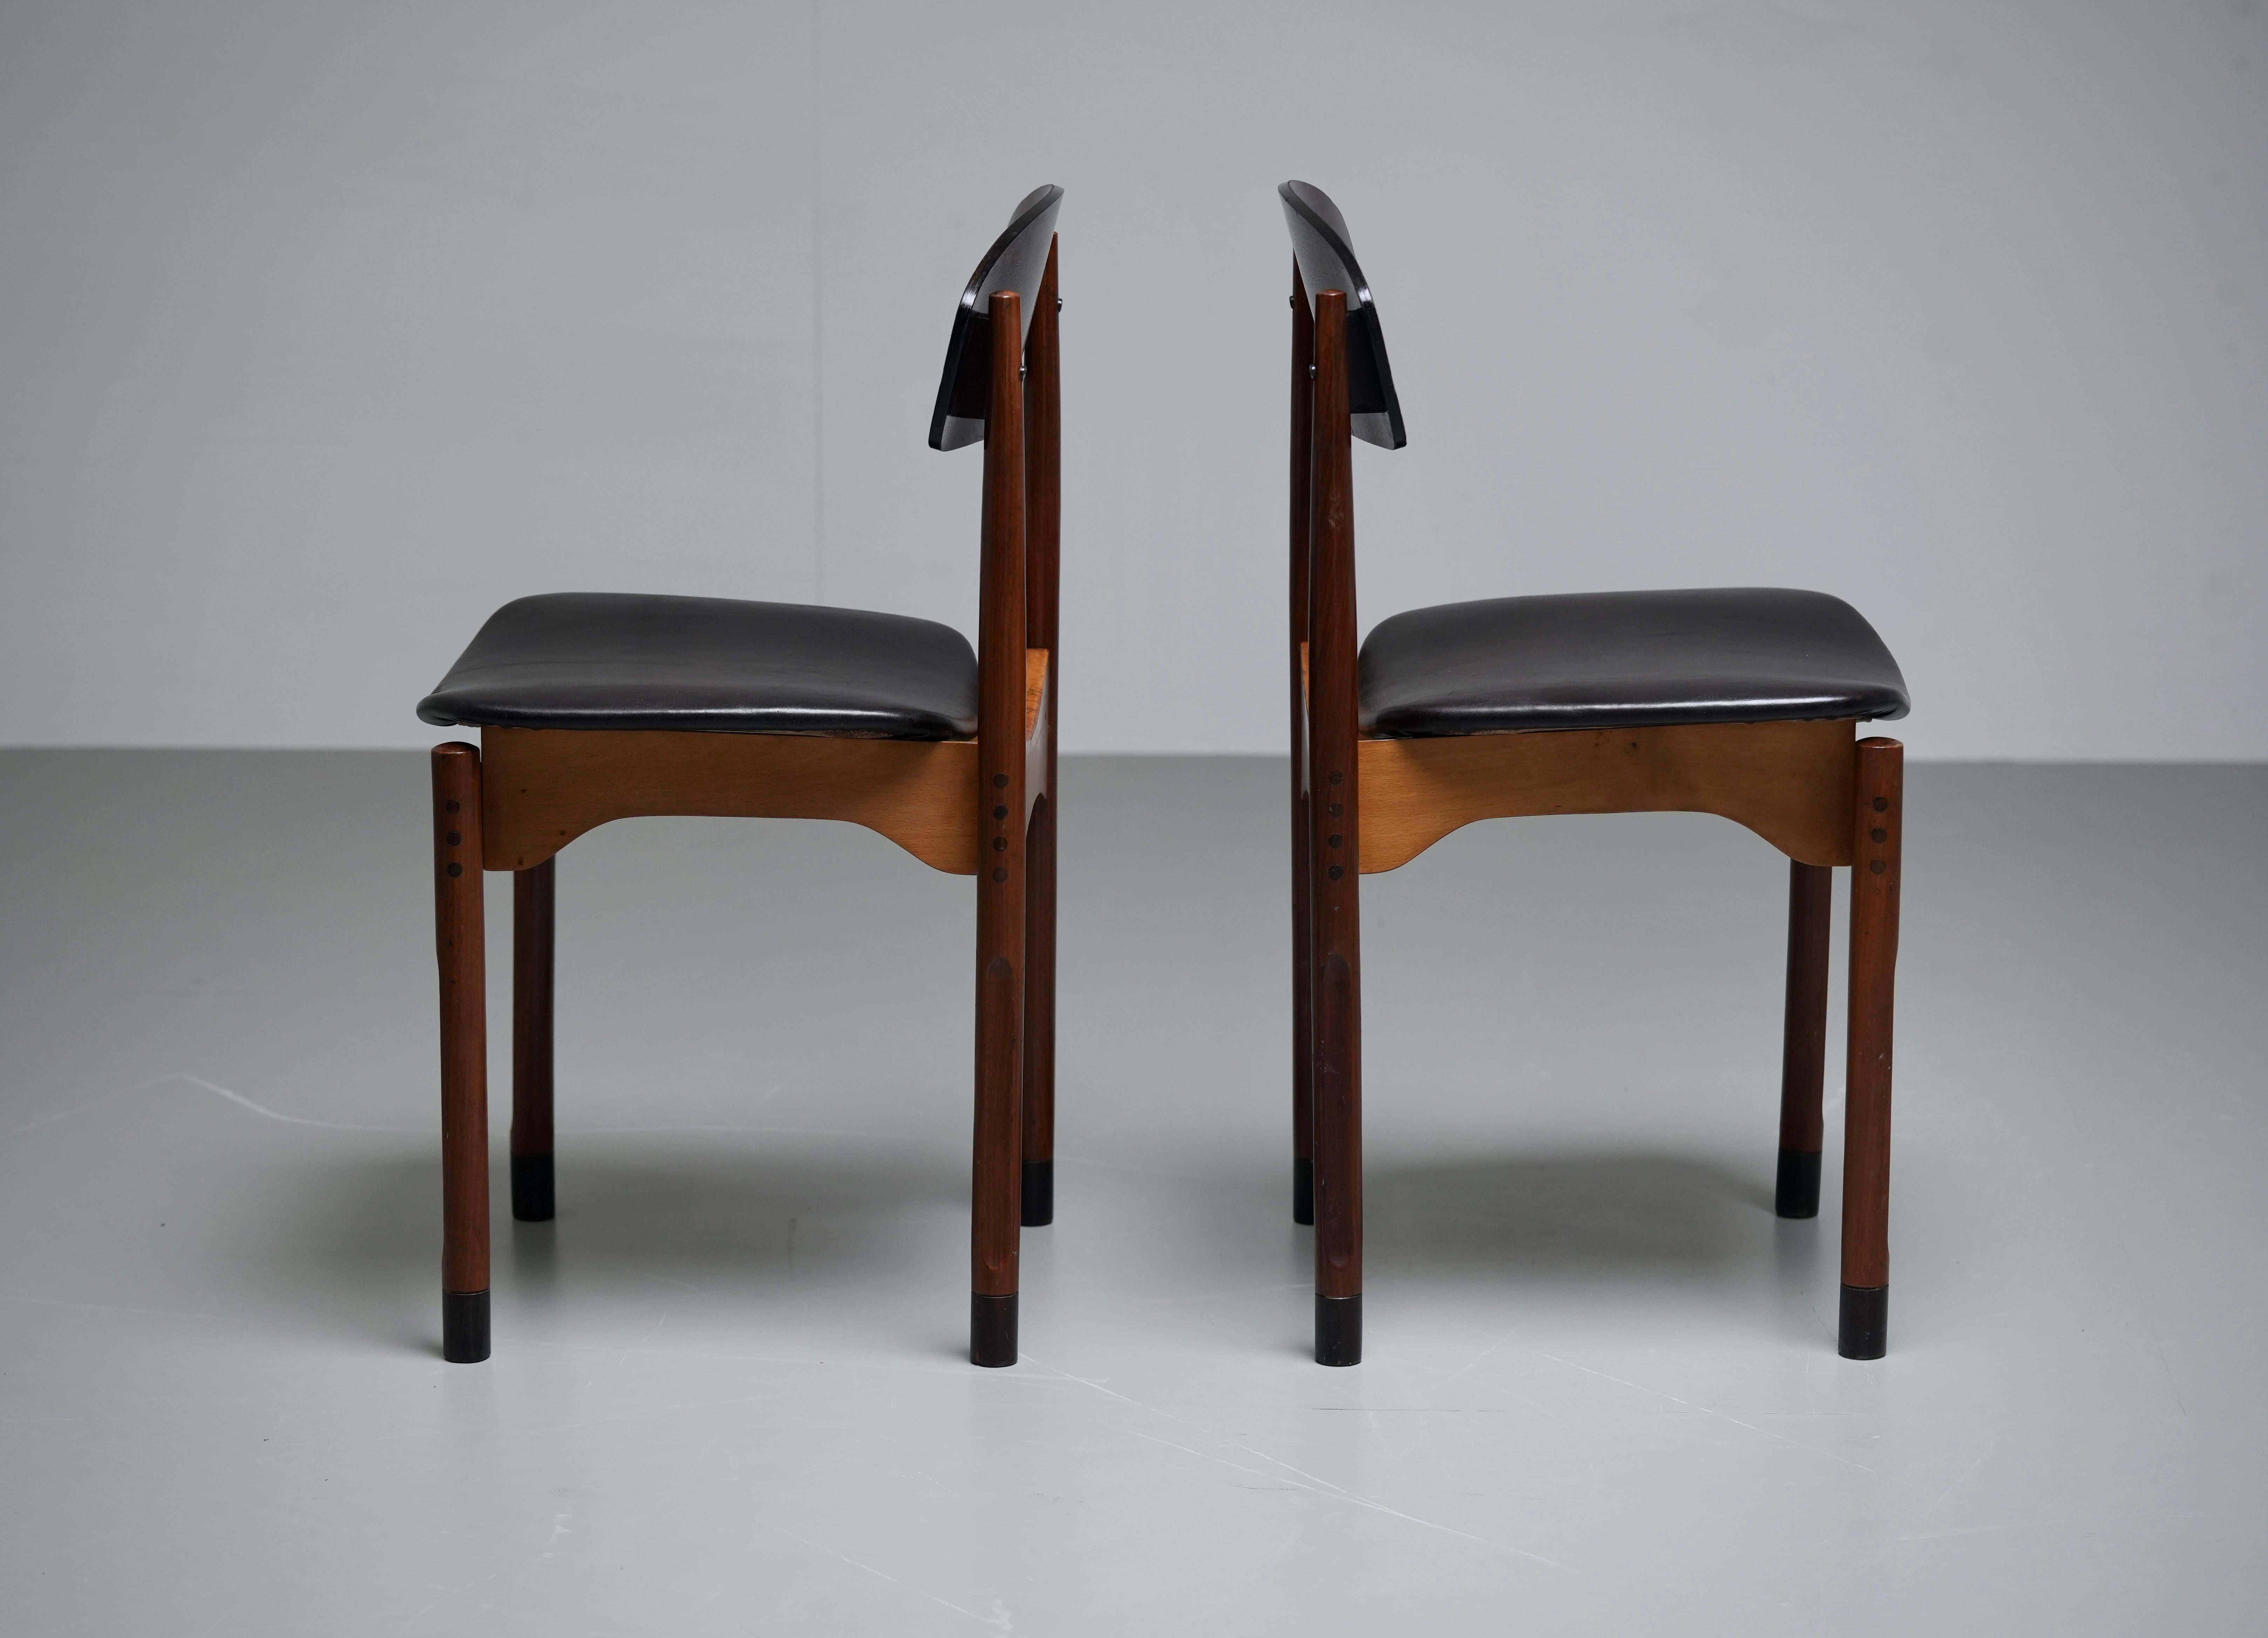 Mid-20th Century Set of 2 Diningroom Chairs in Teak, Mahogany and faux leather, Italty, 1960's For Sale